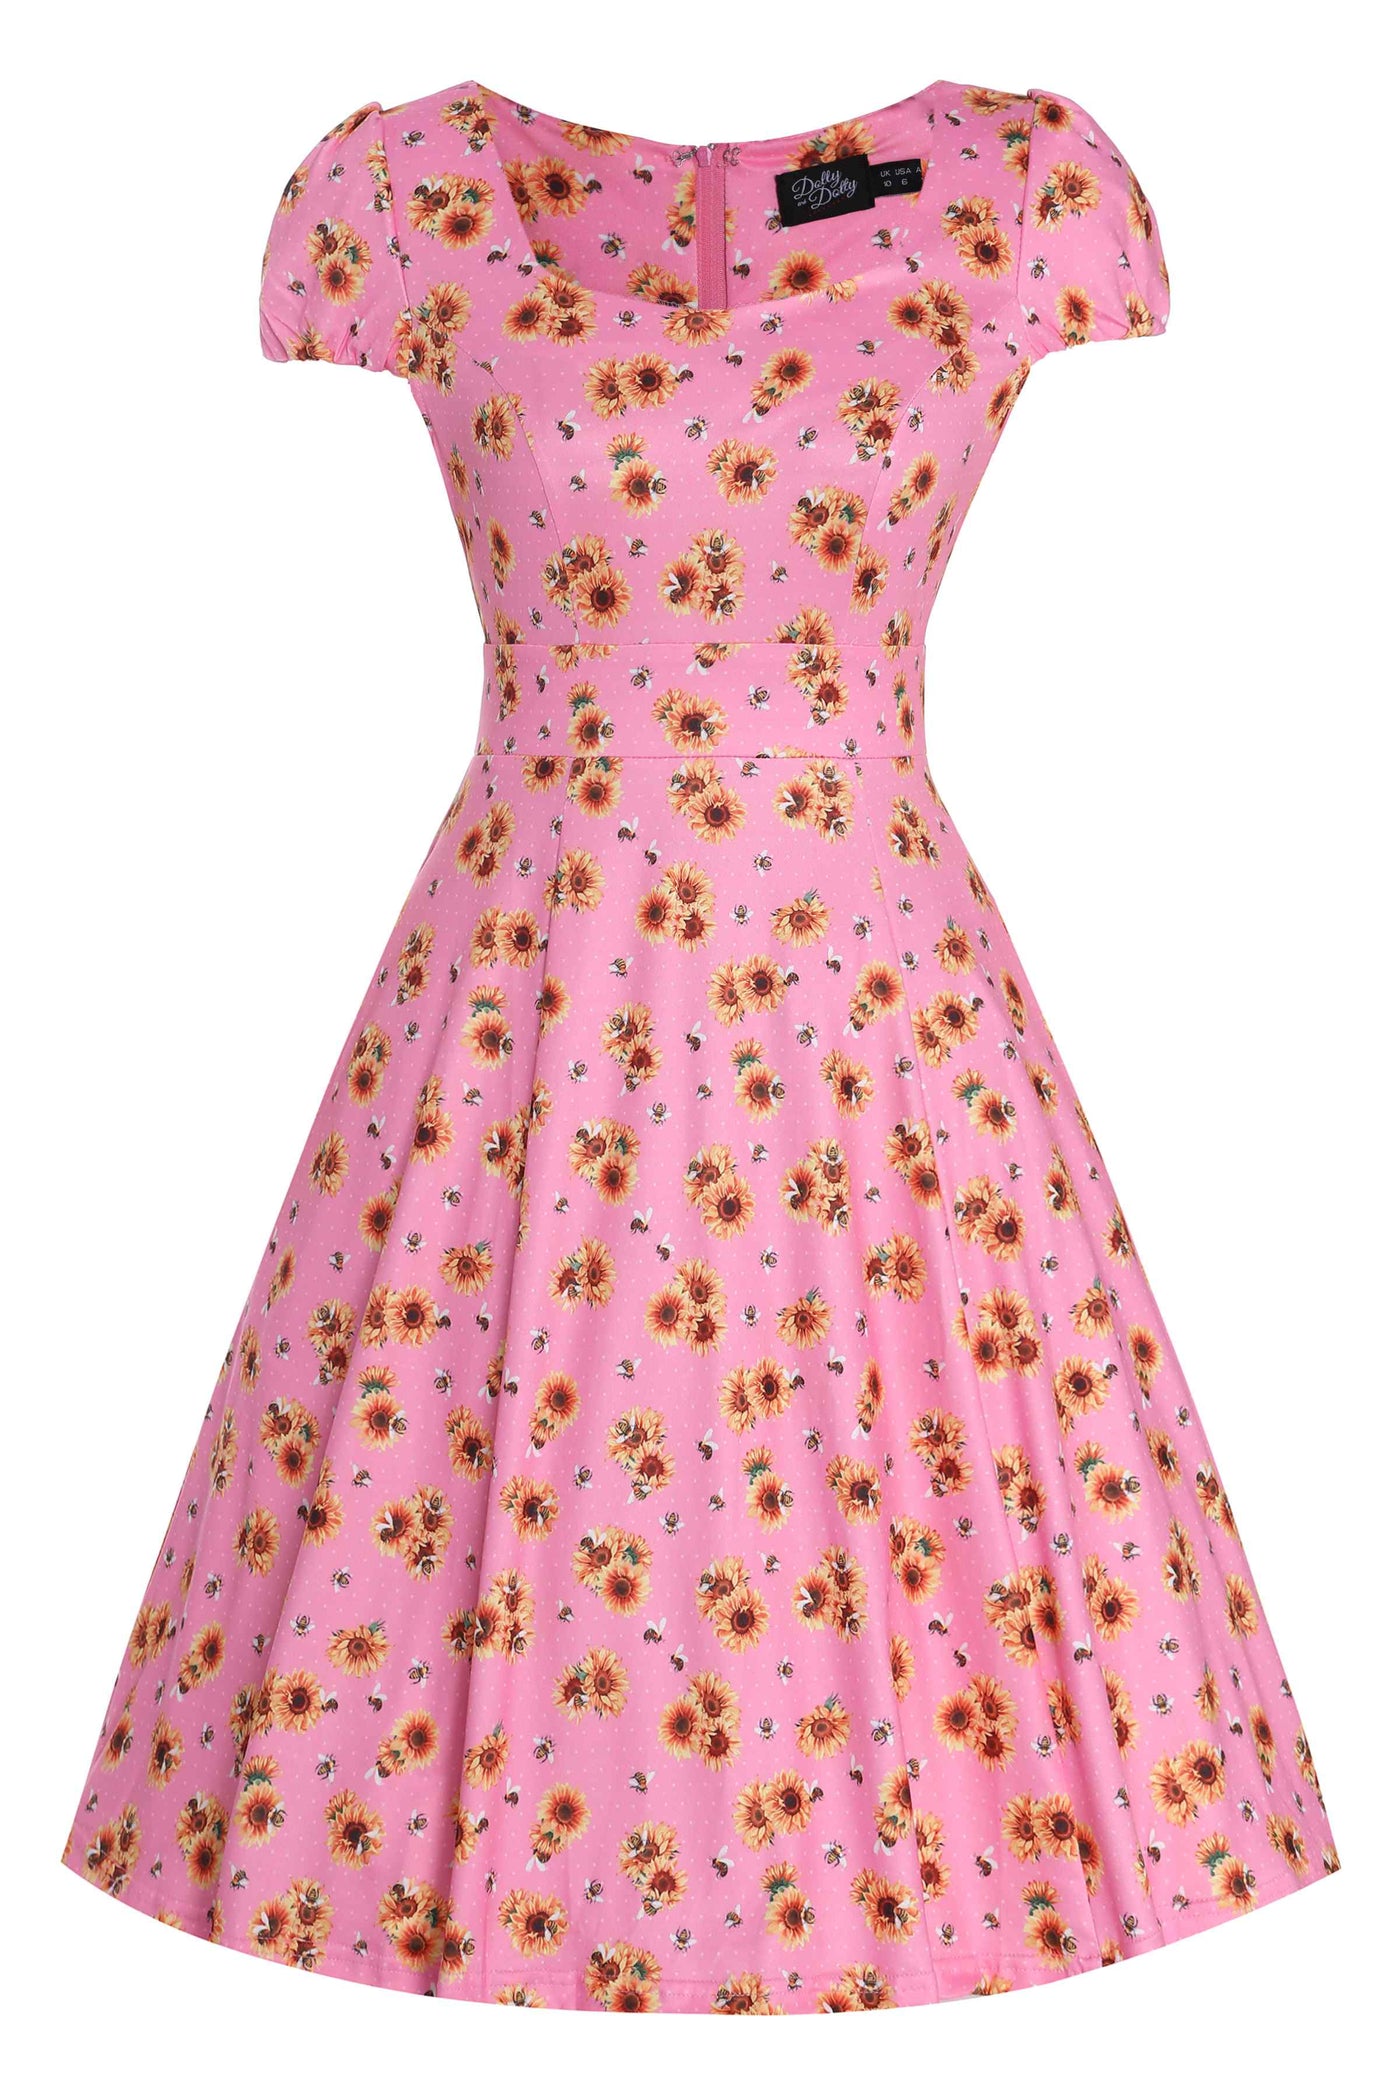 Front View of Sunflower and Bee Sleeved Dress in Pink